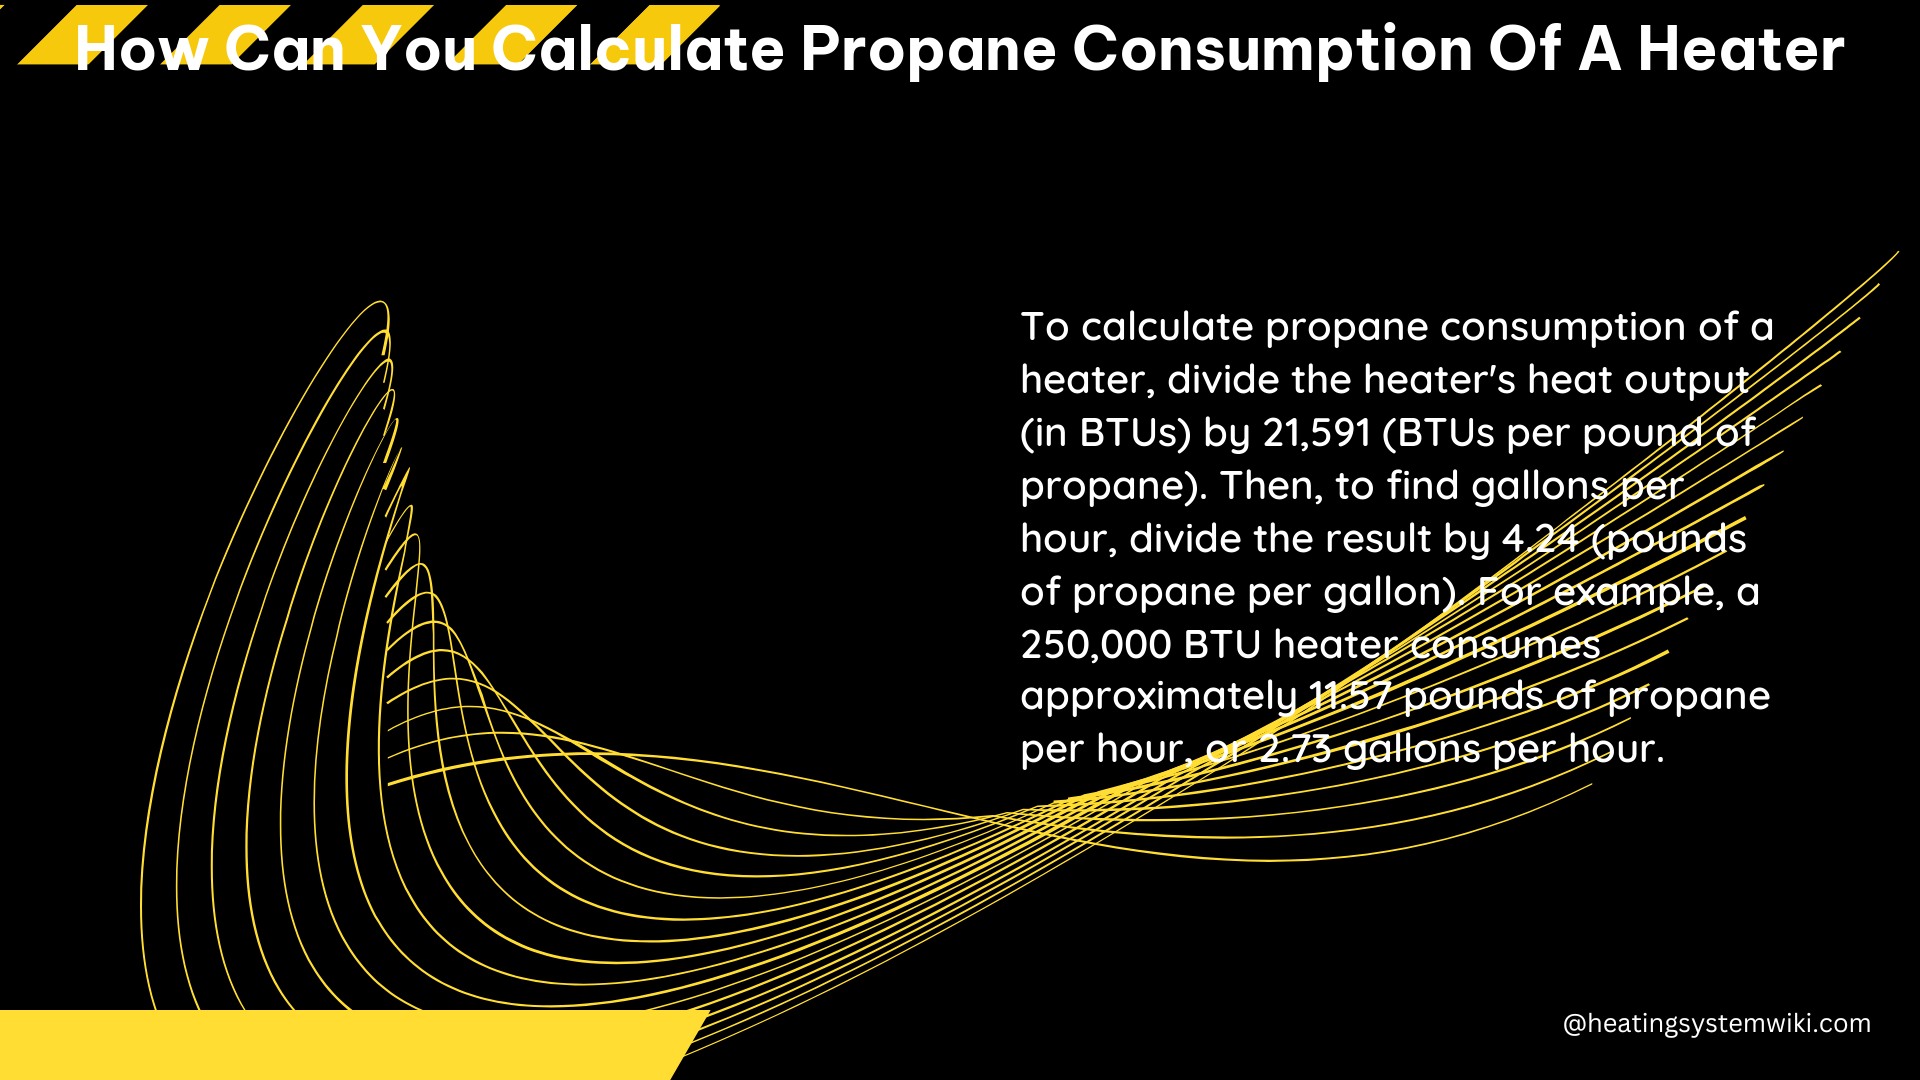 how can you calculate propane consumption of a heater